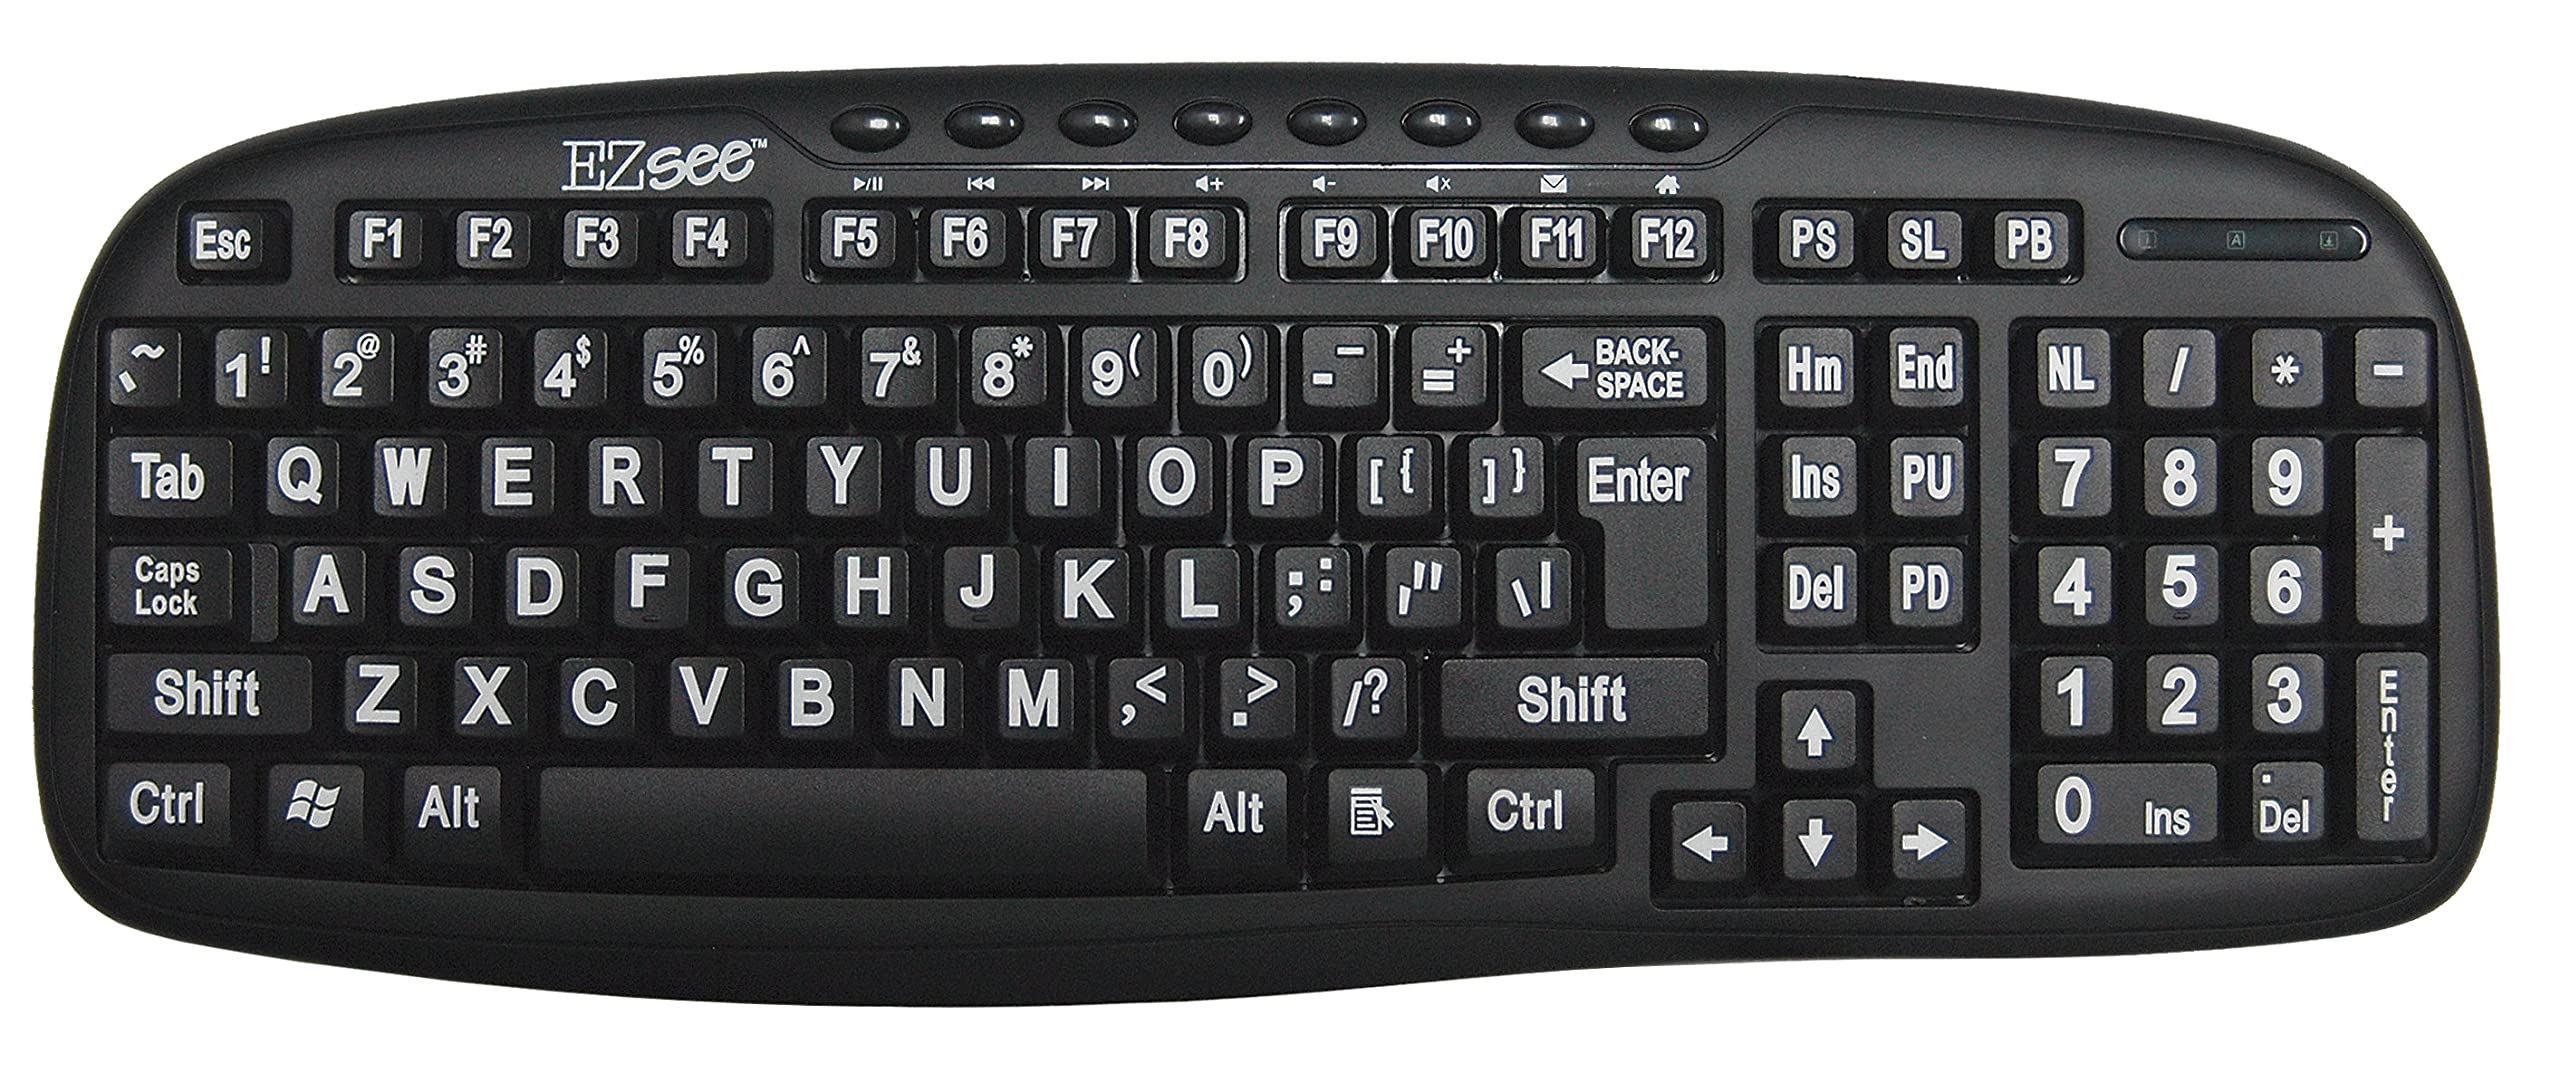 Scroll down to the Keyboards section and click on Add a keyboard.
Select the US QWERTY keyboard layout from the list.